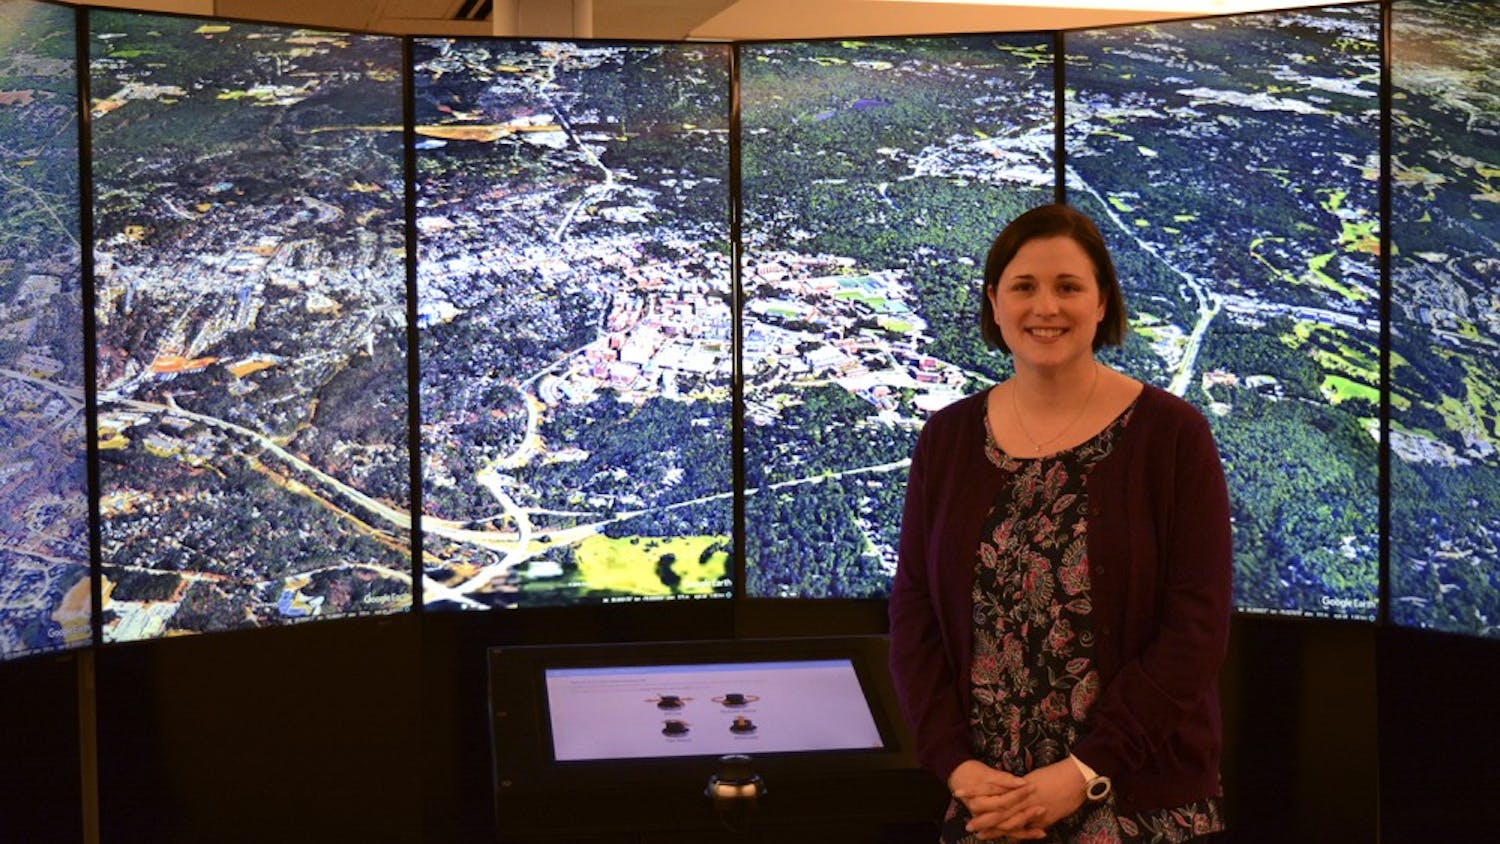 Amanda Henley stands in front of Davis Library's Liquid Galaxy, with the city of Chapel Hill pictured.